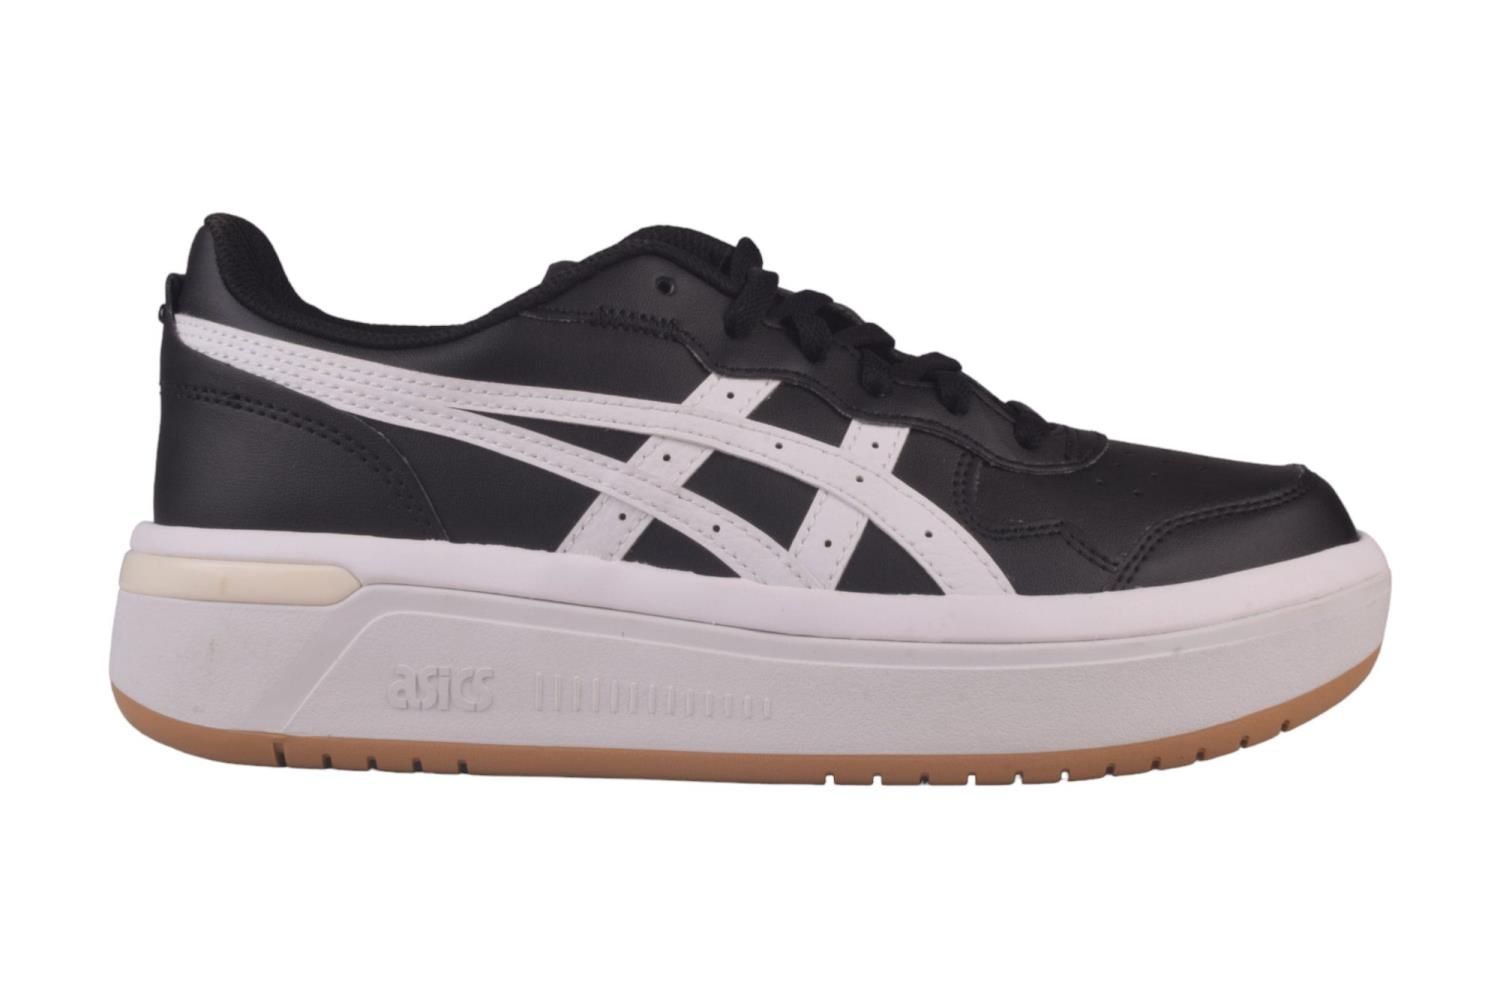 Asics BLACK/WHITE SNEAKERS ::PARMAR BOOT HOUSE | Buy Footwear and 